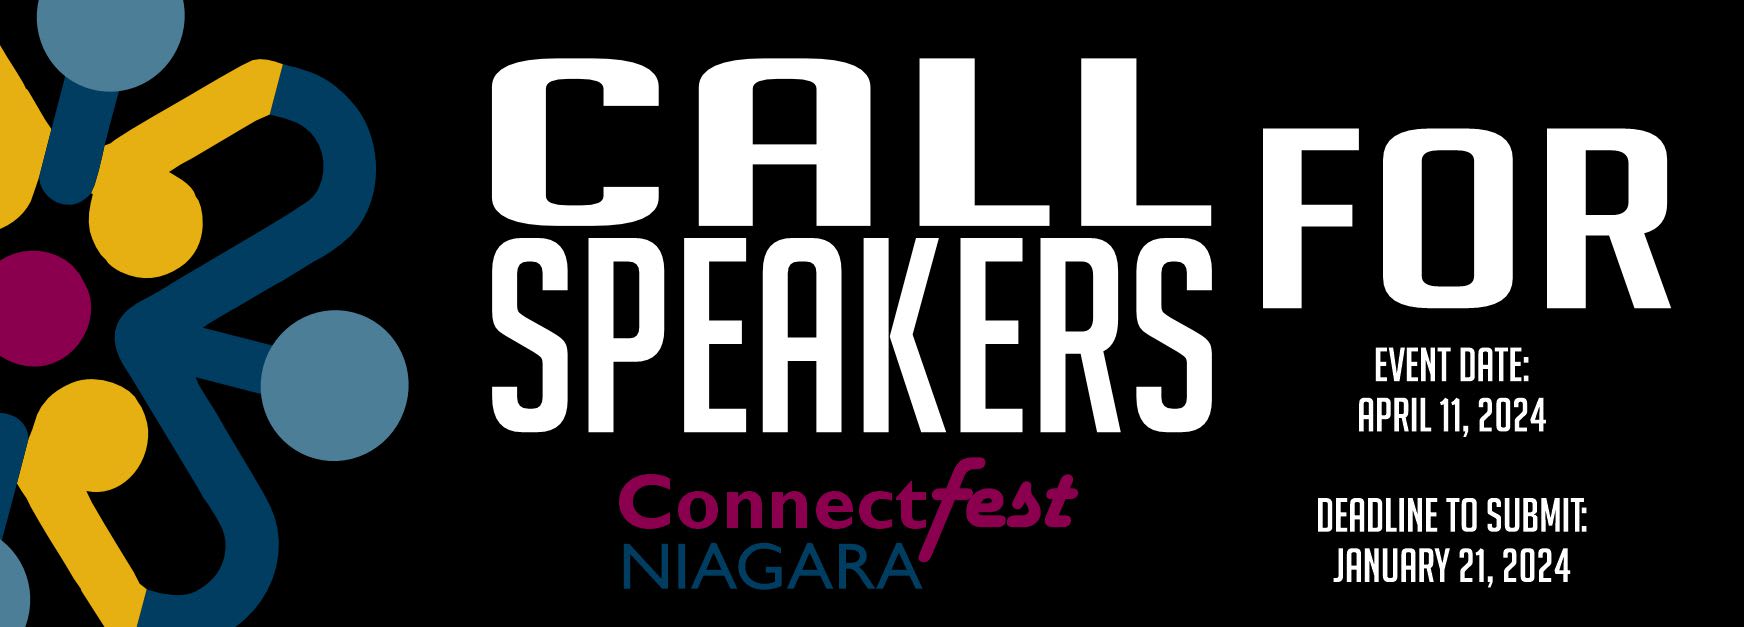 call for speakers banner